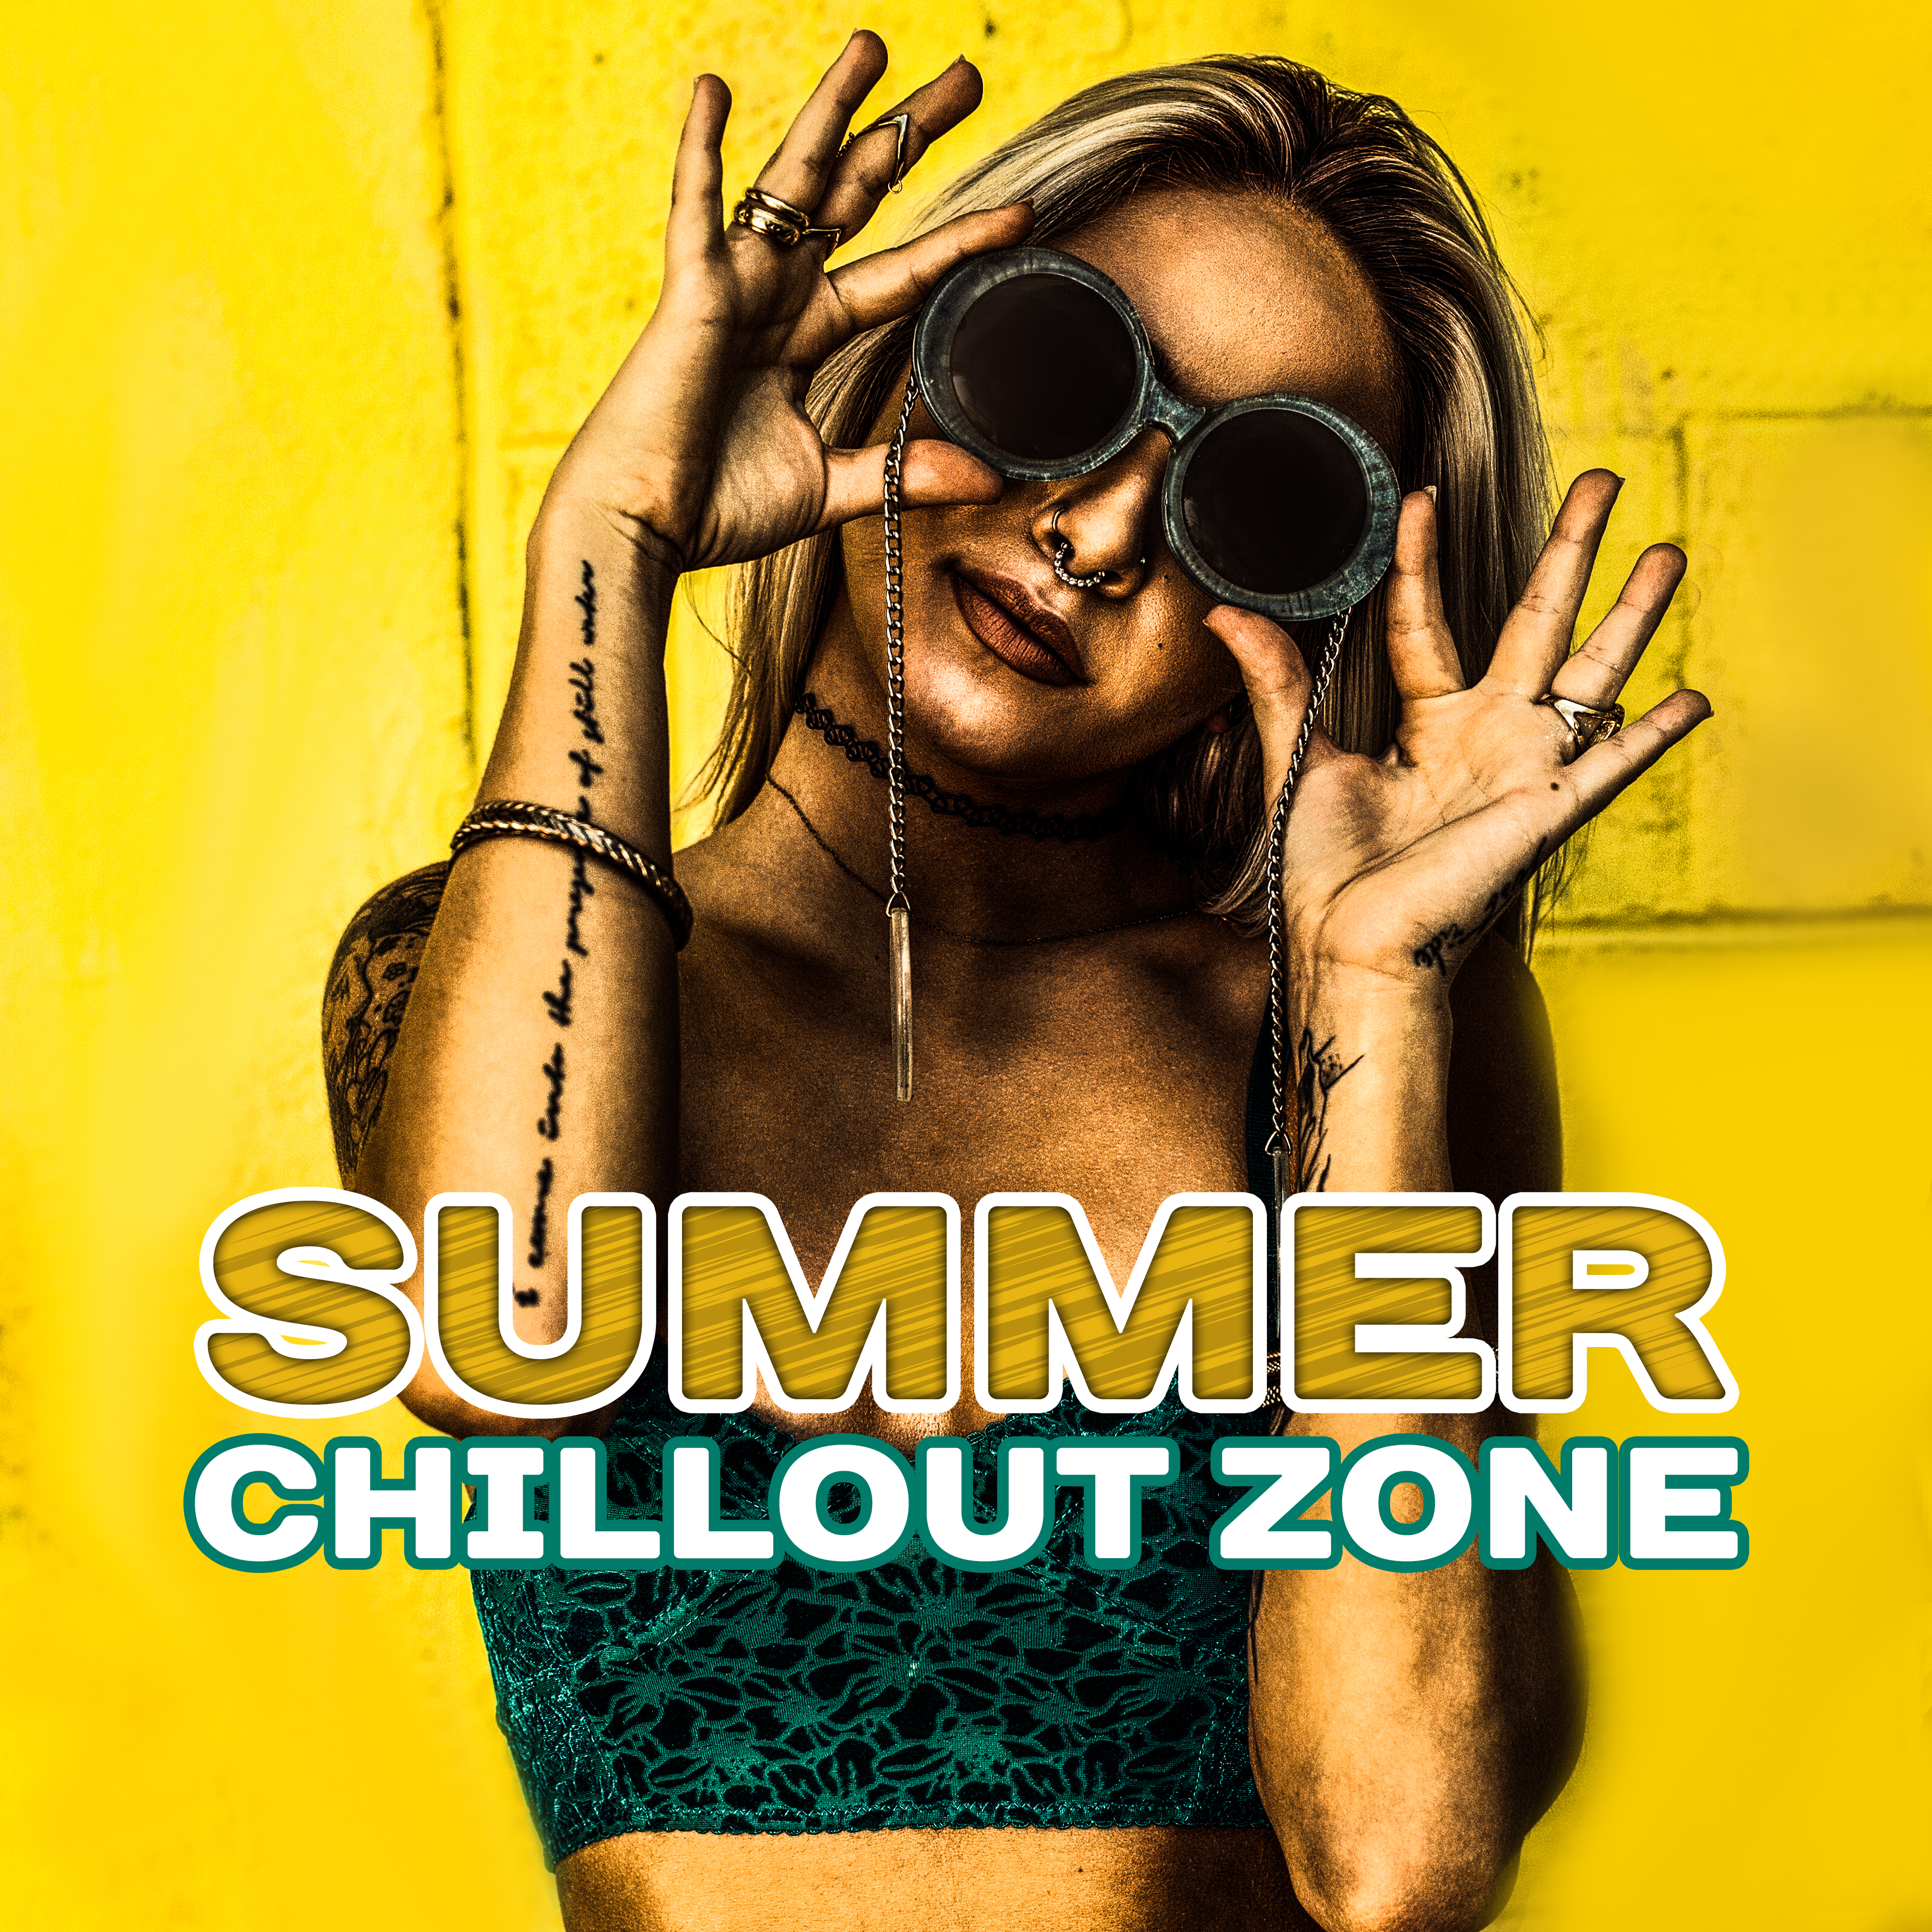 Summer Chillout Zone  Chill Out 2017, Relax Lounge, Summertime, Beach Music, Ibiza Dance